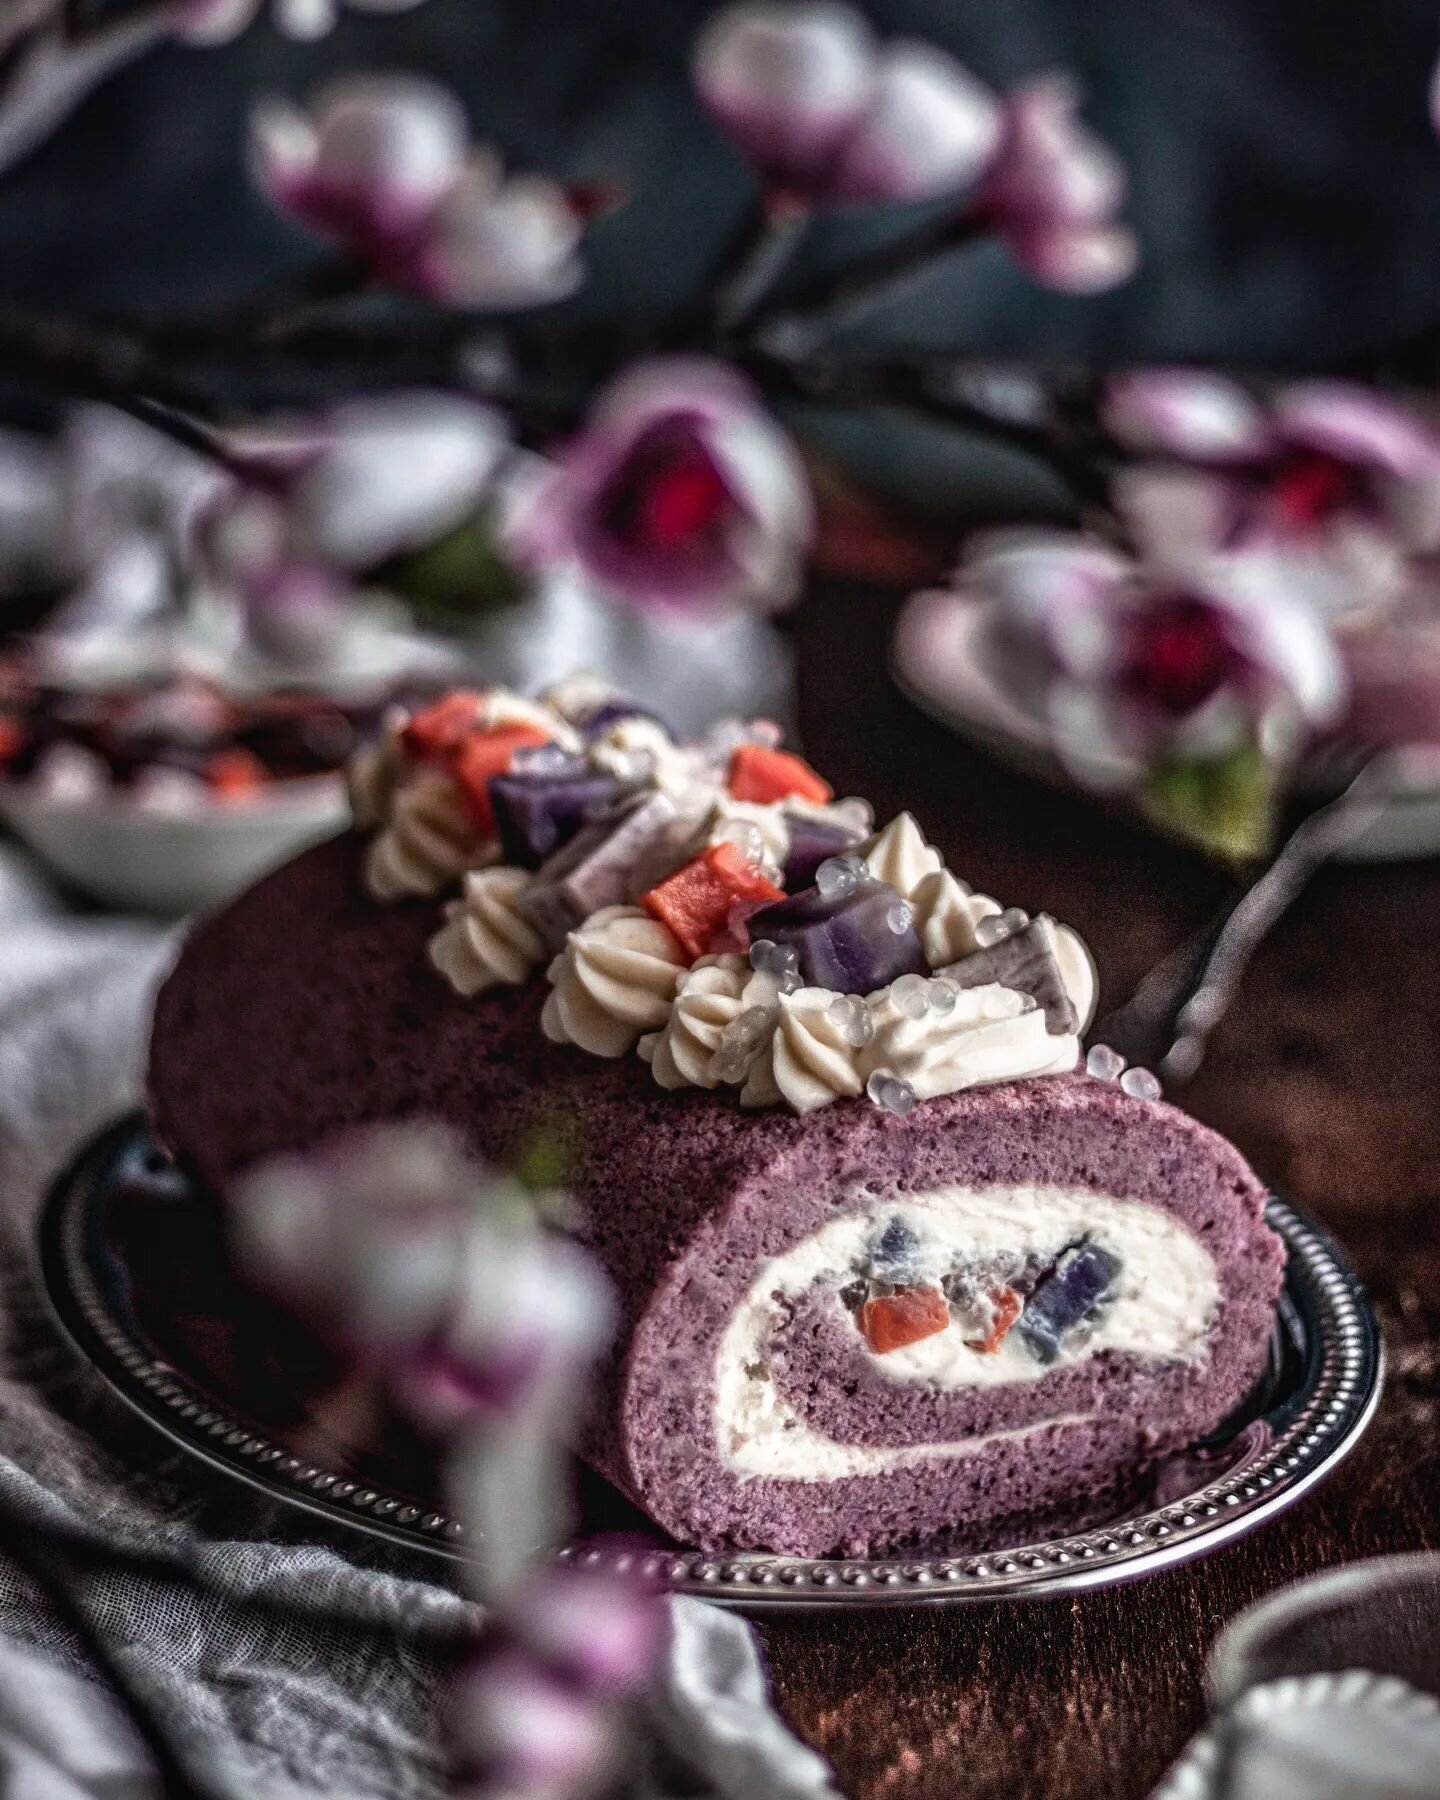 Bloom.

Bubur cha cha roll cake pt.4.

An oldie but a goodie. Made in 2021, but an image I never posted.

I haven't shot anything since January.

Sometimes I wonder whether I actually do like the process of photography, or whether I just like the ide